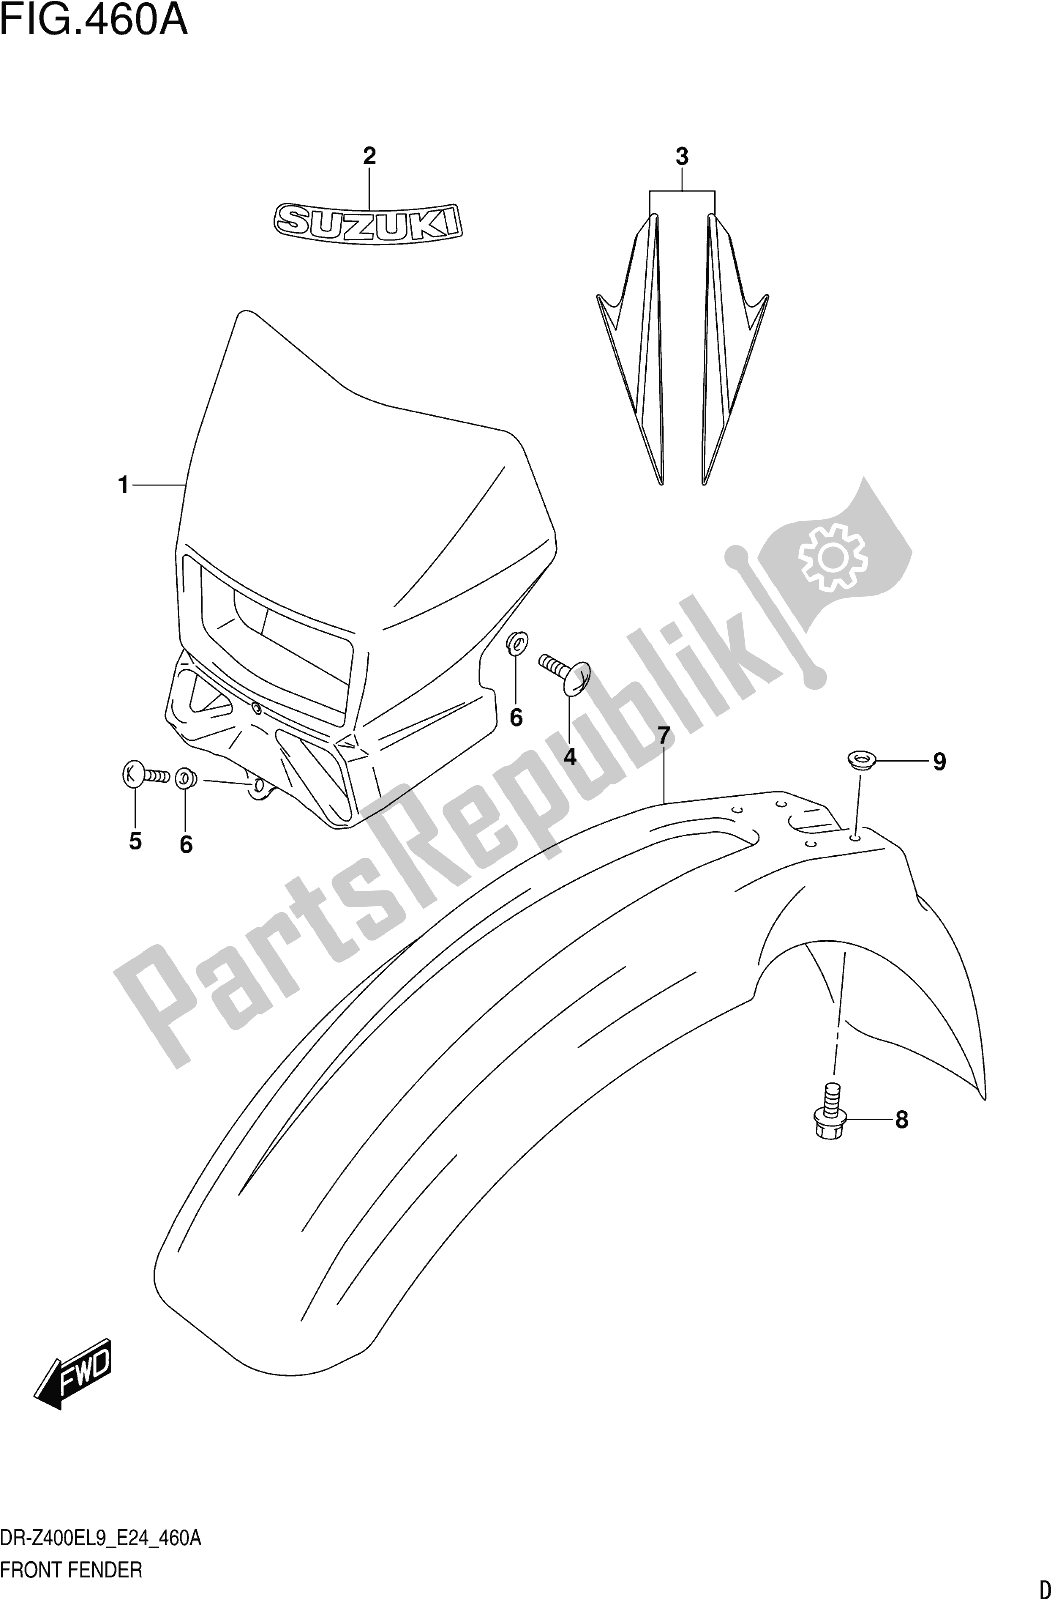 All parts for the Fig. 460a Front Fender of the Suzuki DR-Z 400E 2019